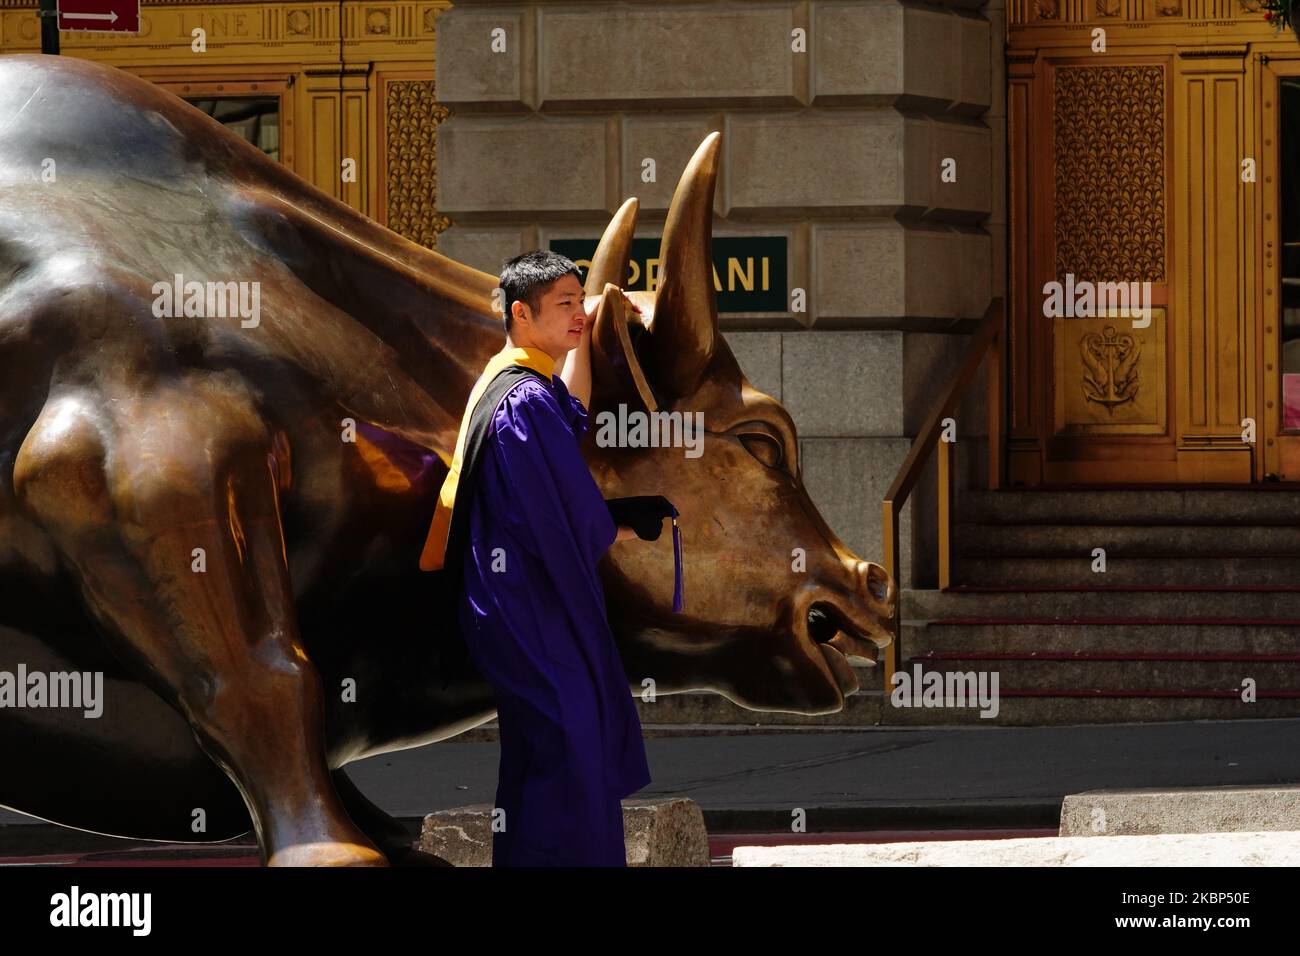 A view of new graduates taking photos at the Charging Bull during the coronavirus pandemic on May 20, 2020 in Bowling Green, New York City. COVID-19 has spread to most countries around the world, claiming over 316,000 lives with over 4.8 million infections reported. (Photo by John Nacion/NurPhoto) Stock Photo